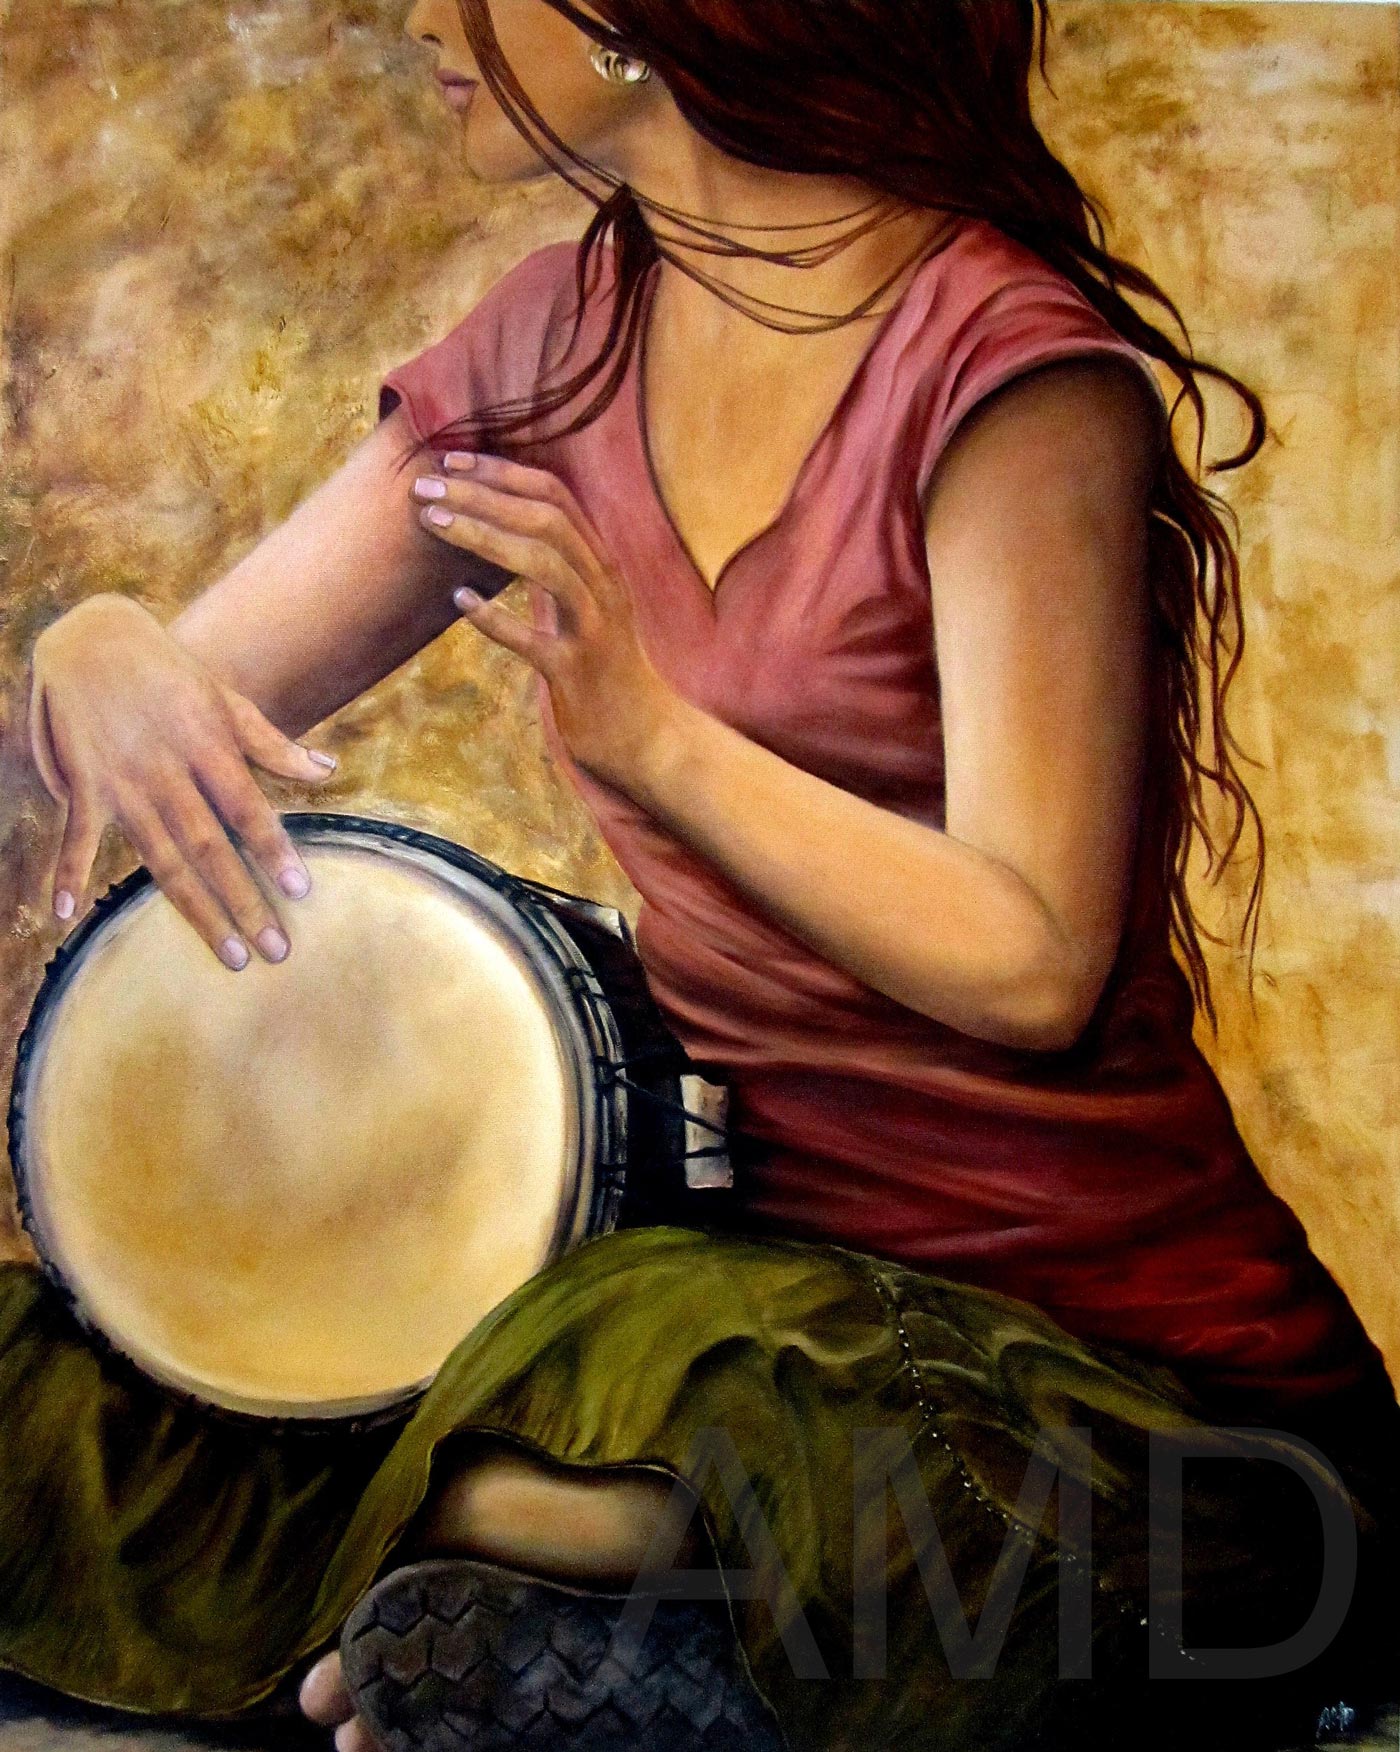 "All About the Music - Drum", 18x24